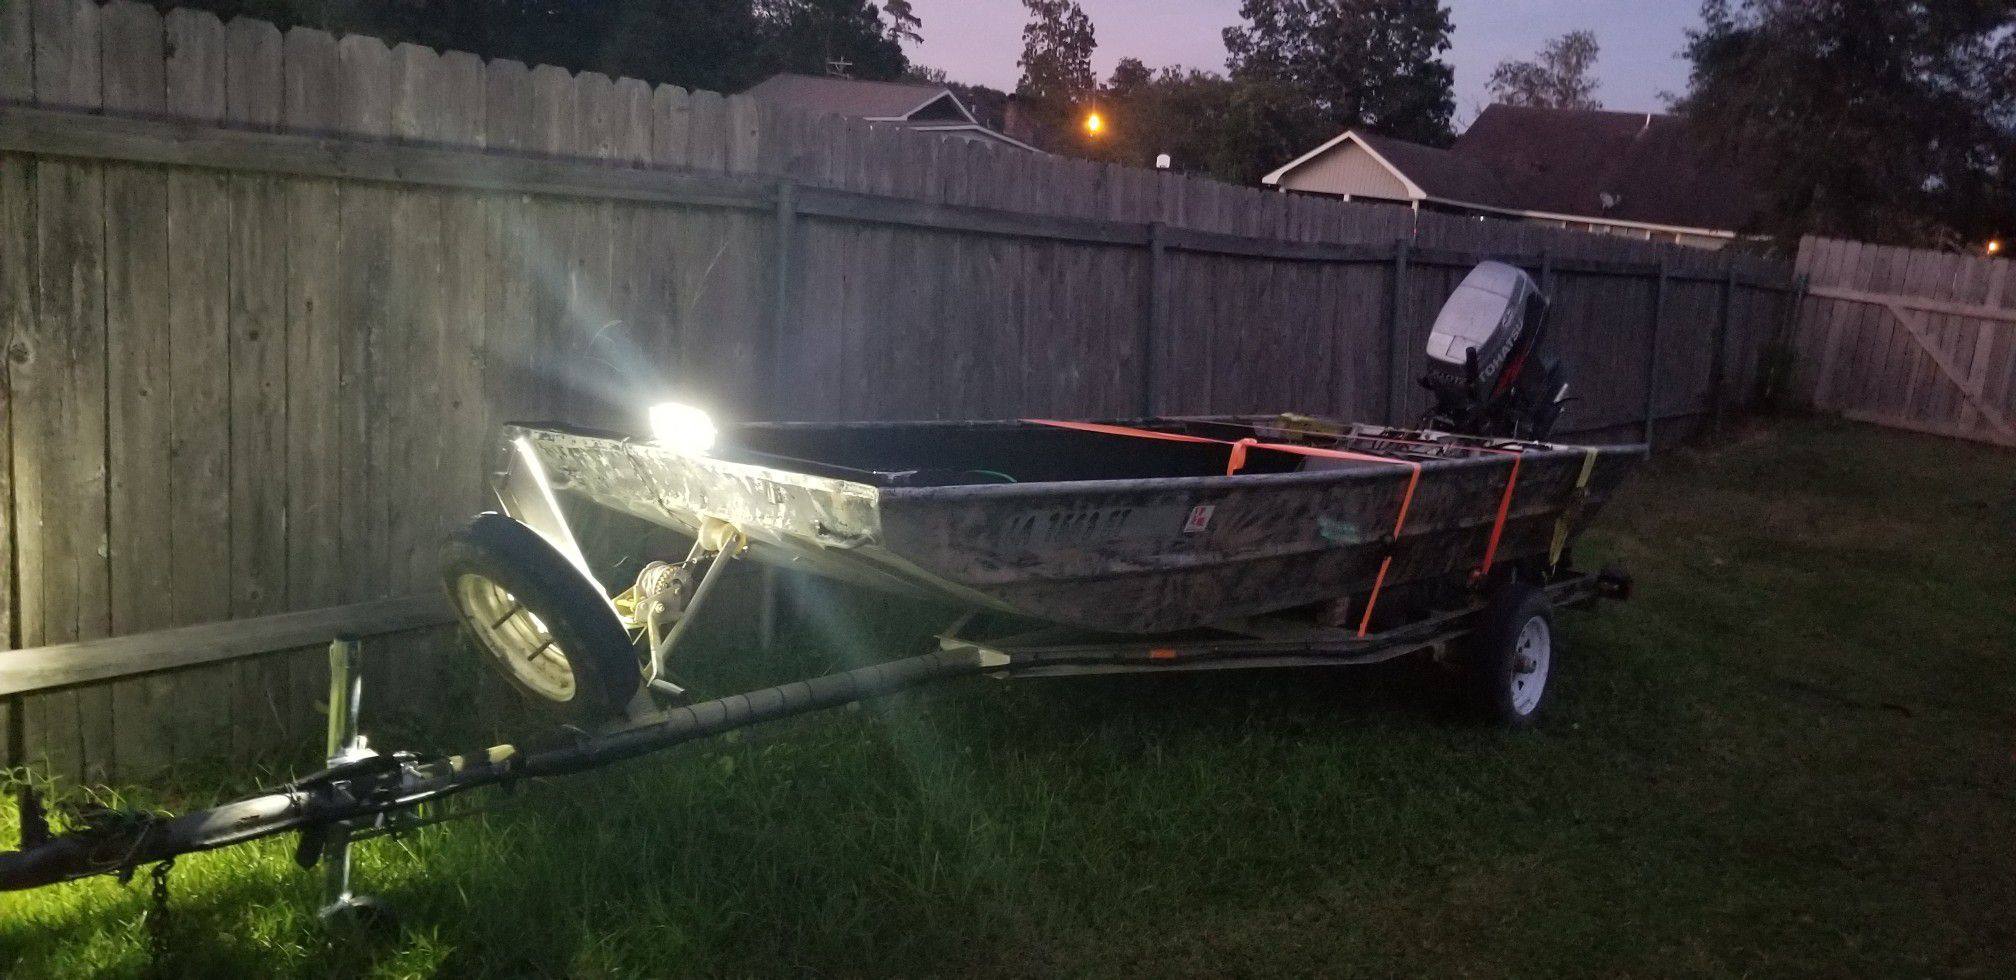 14' boat brand new trailer lights2 new trailier tires 40 horse tahatsu 2 stroke DLTI fuel injected runs good and powerful